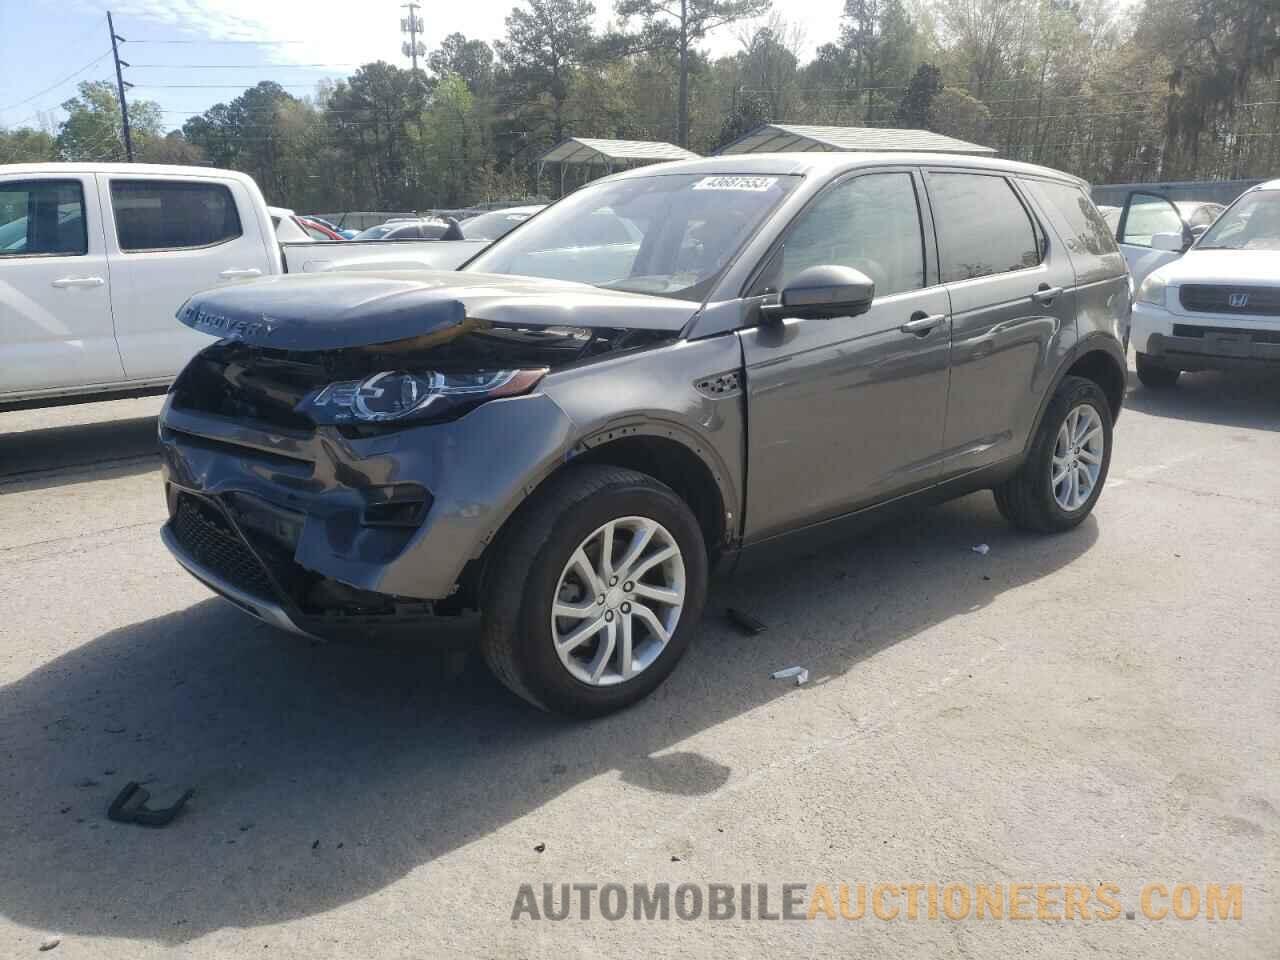 SALCR2RX3JH731371 LAND ROVER DISCOVERY 2018